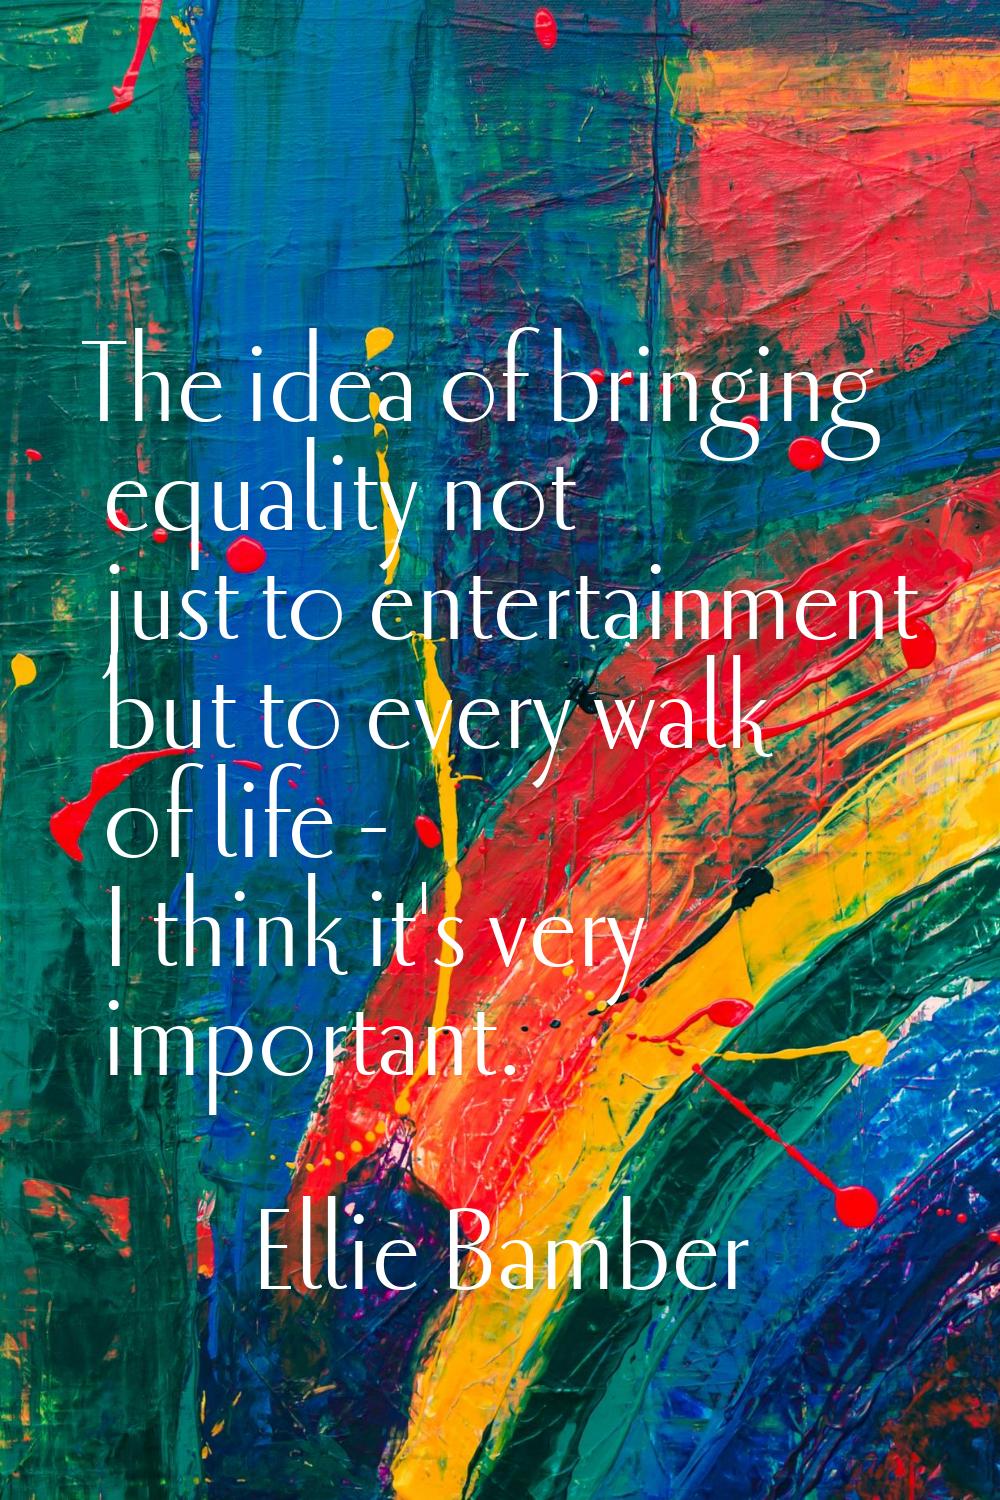 The idea of bringing equality not just to entertainment but to every walk of life - I think it's ve